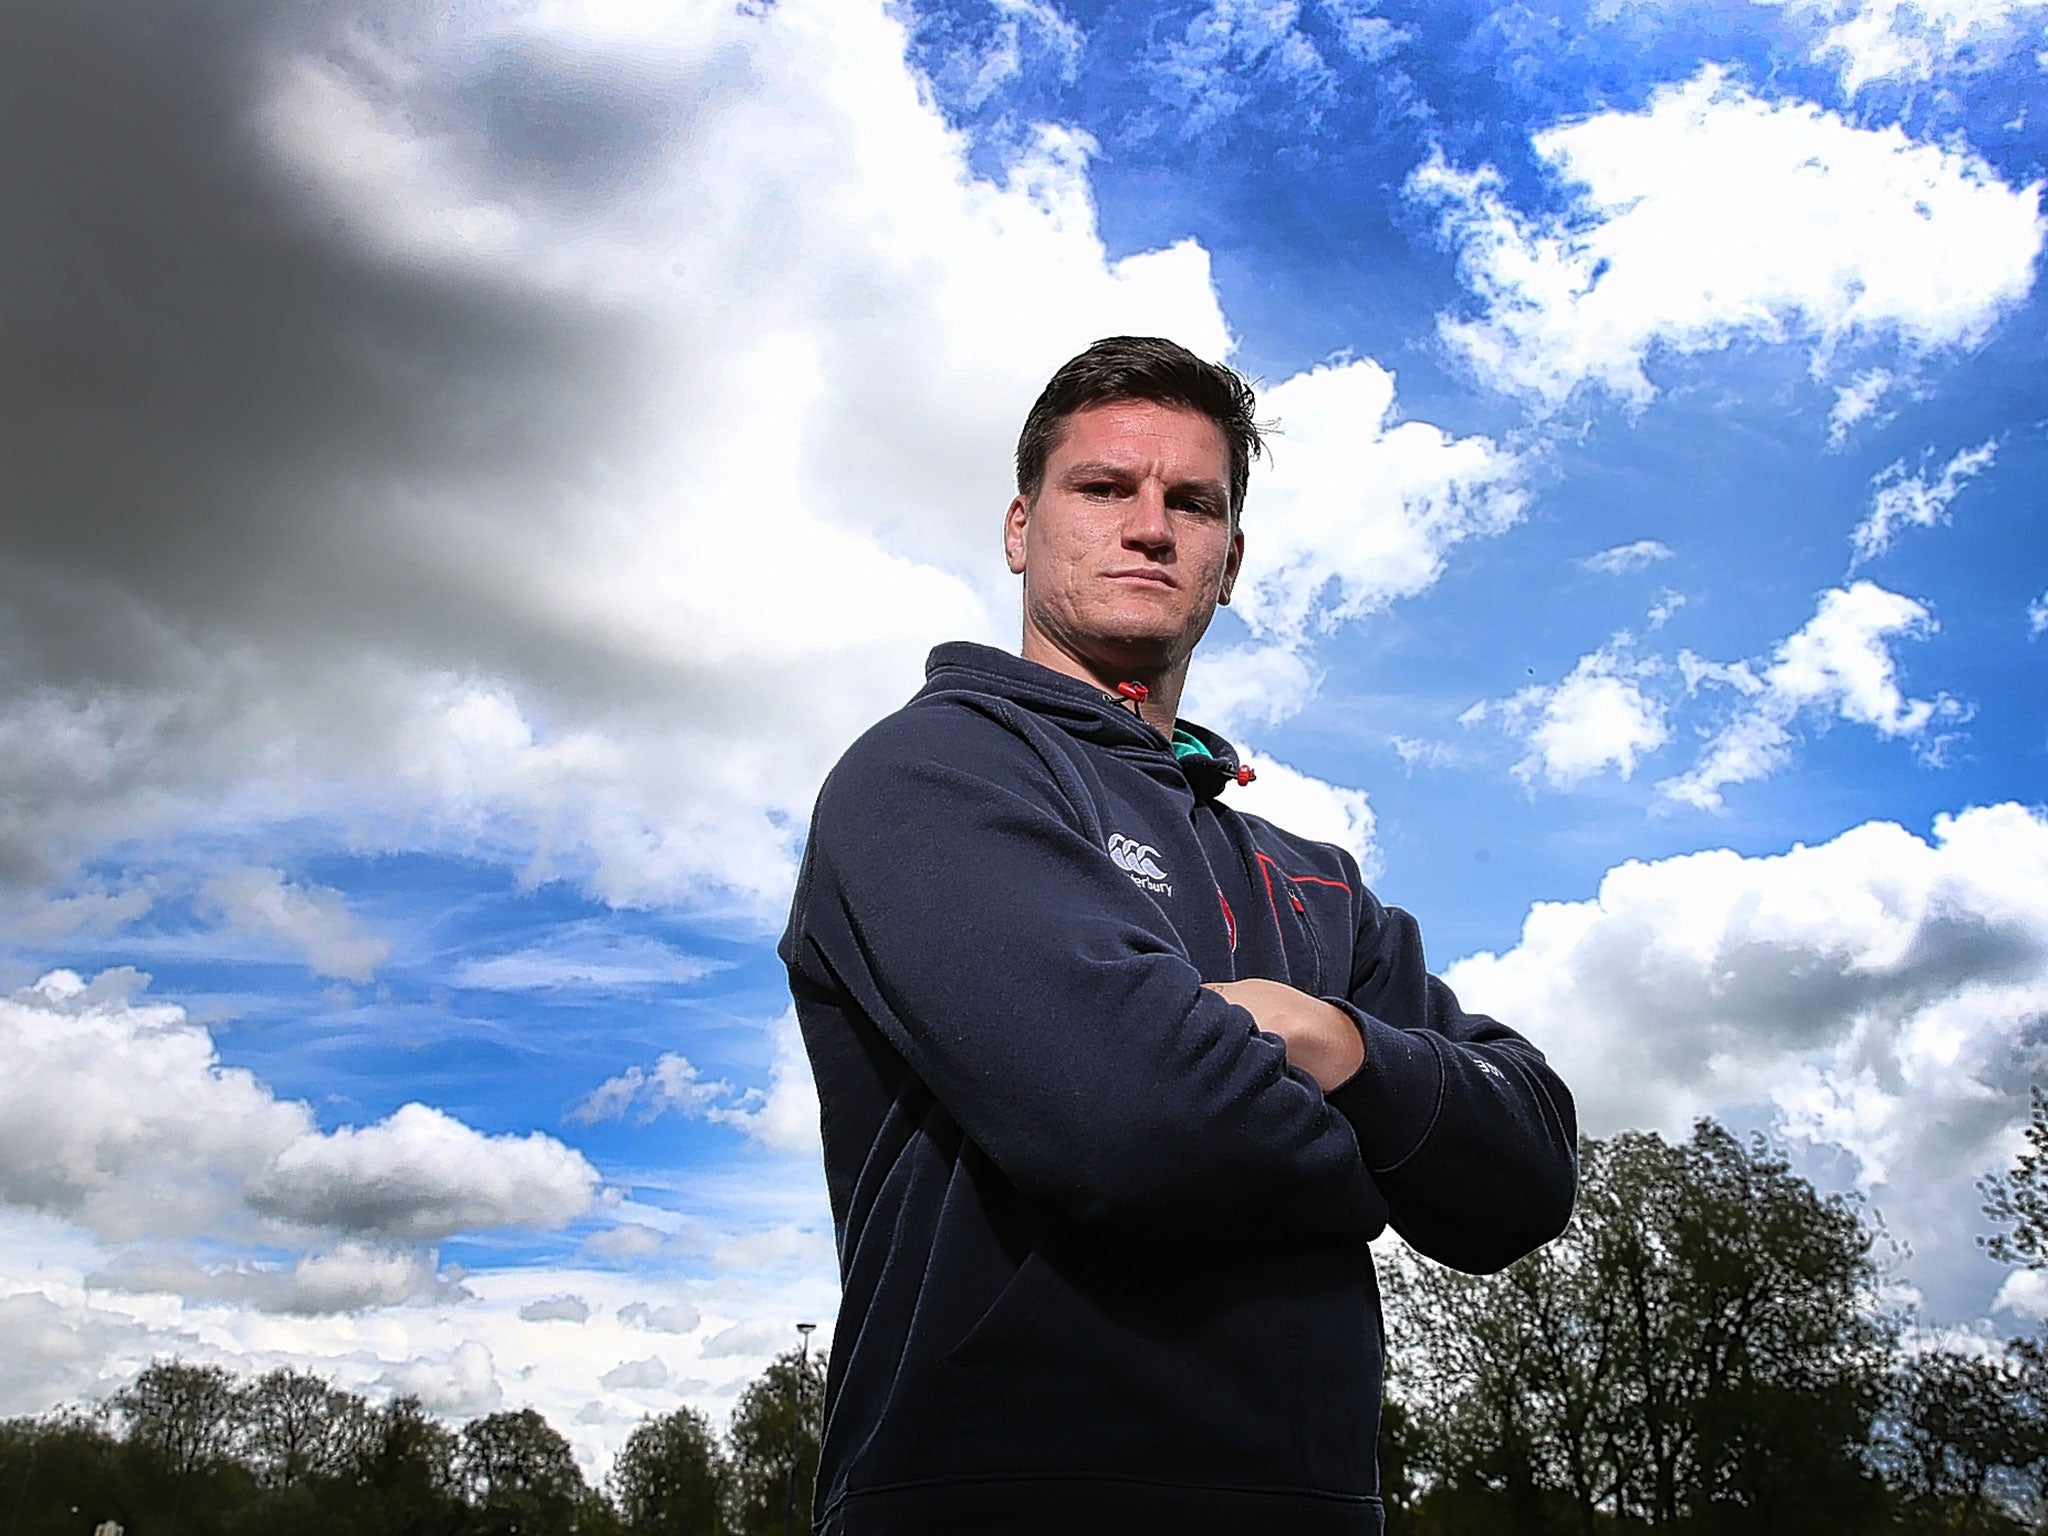 Freddie Burns still has strong ties to Bath as most of his family live in the city